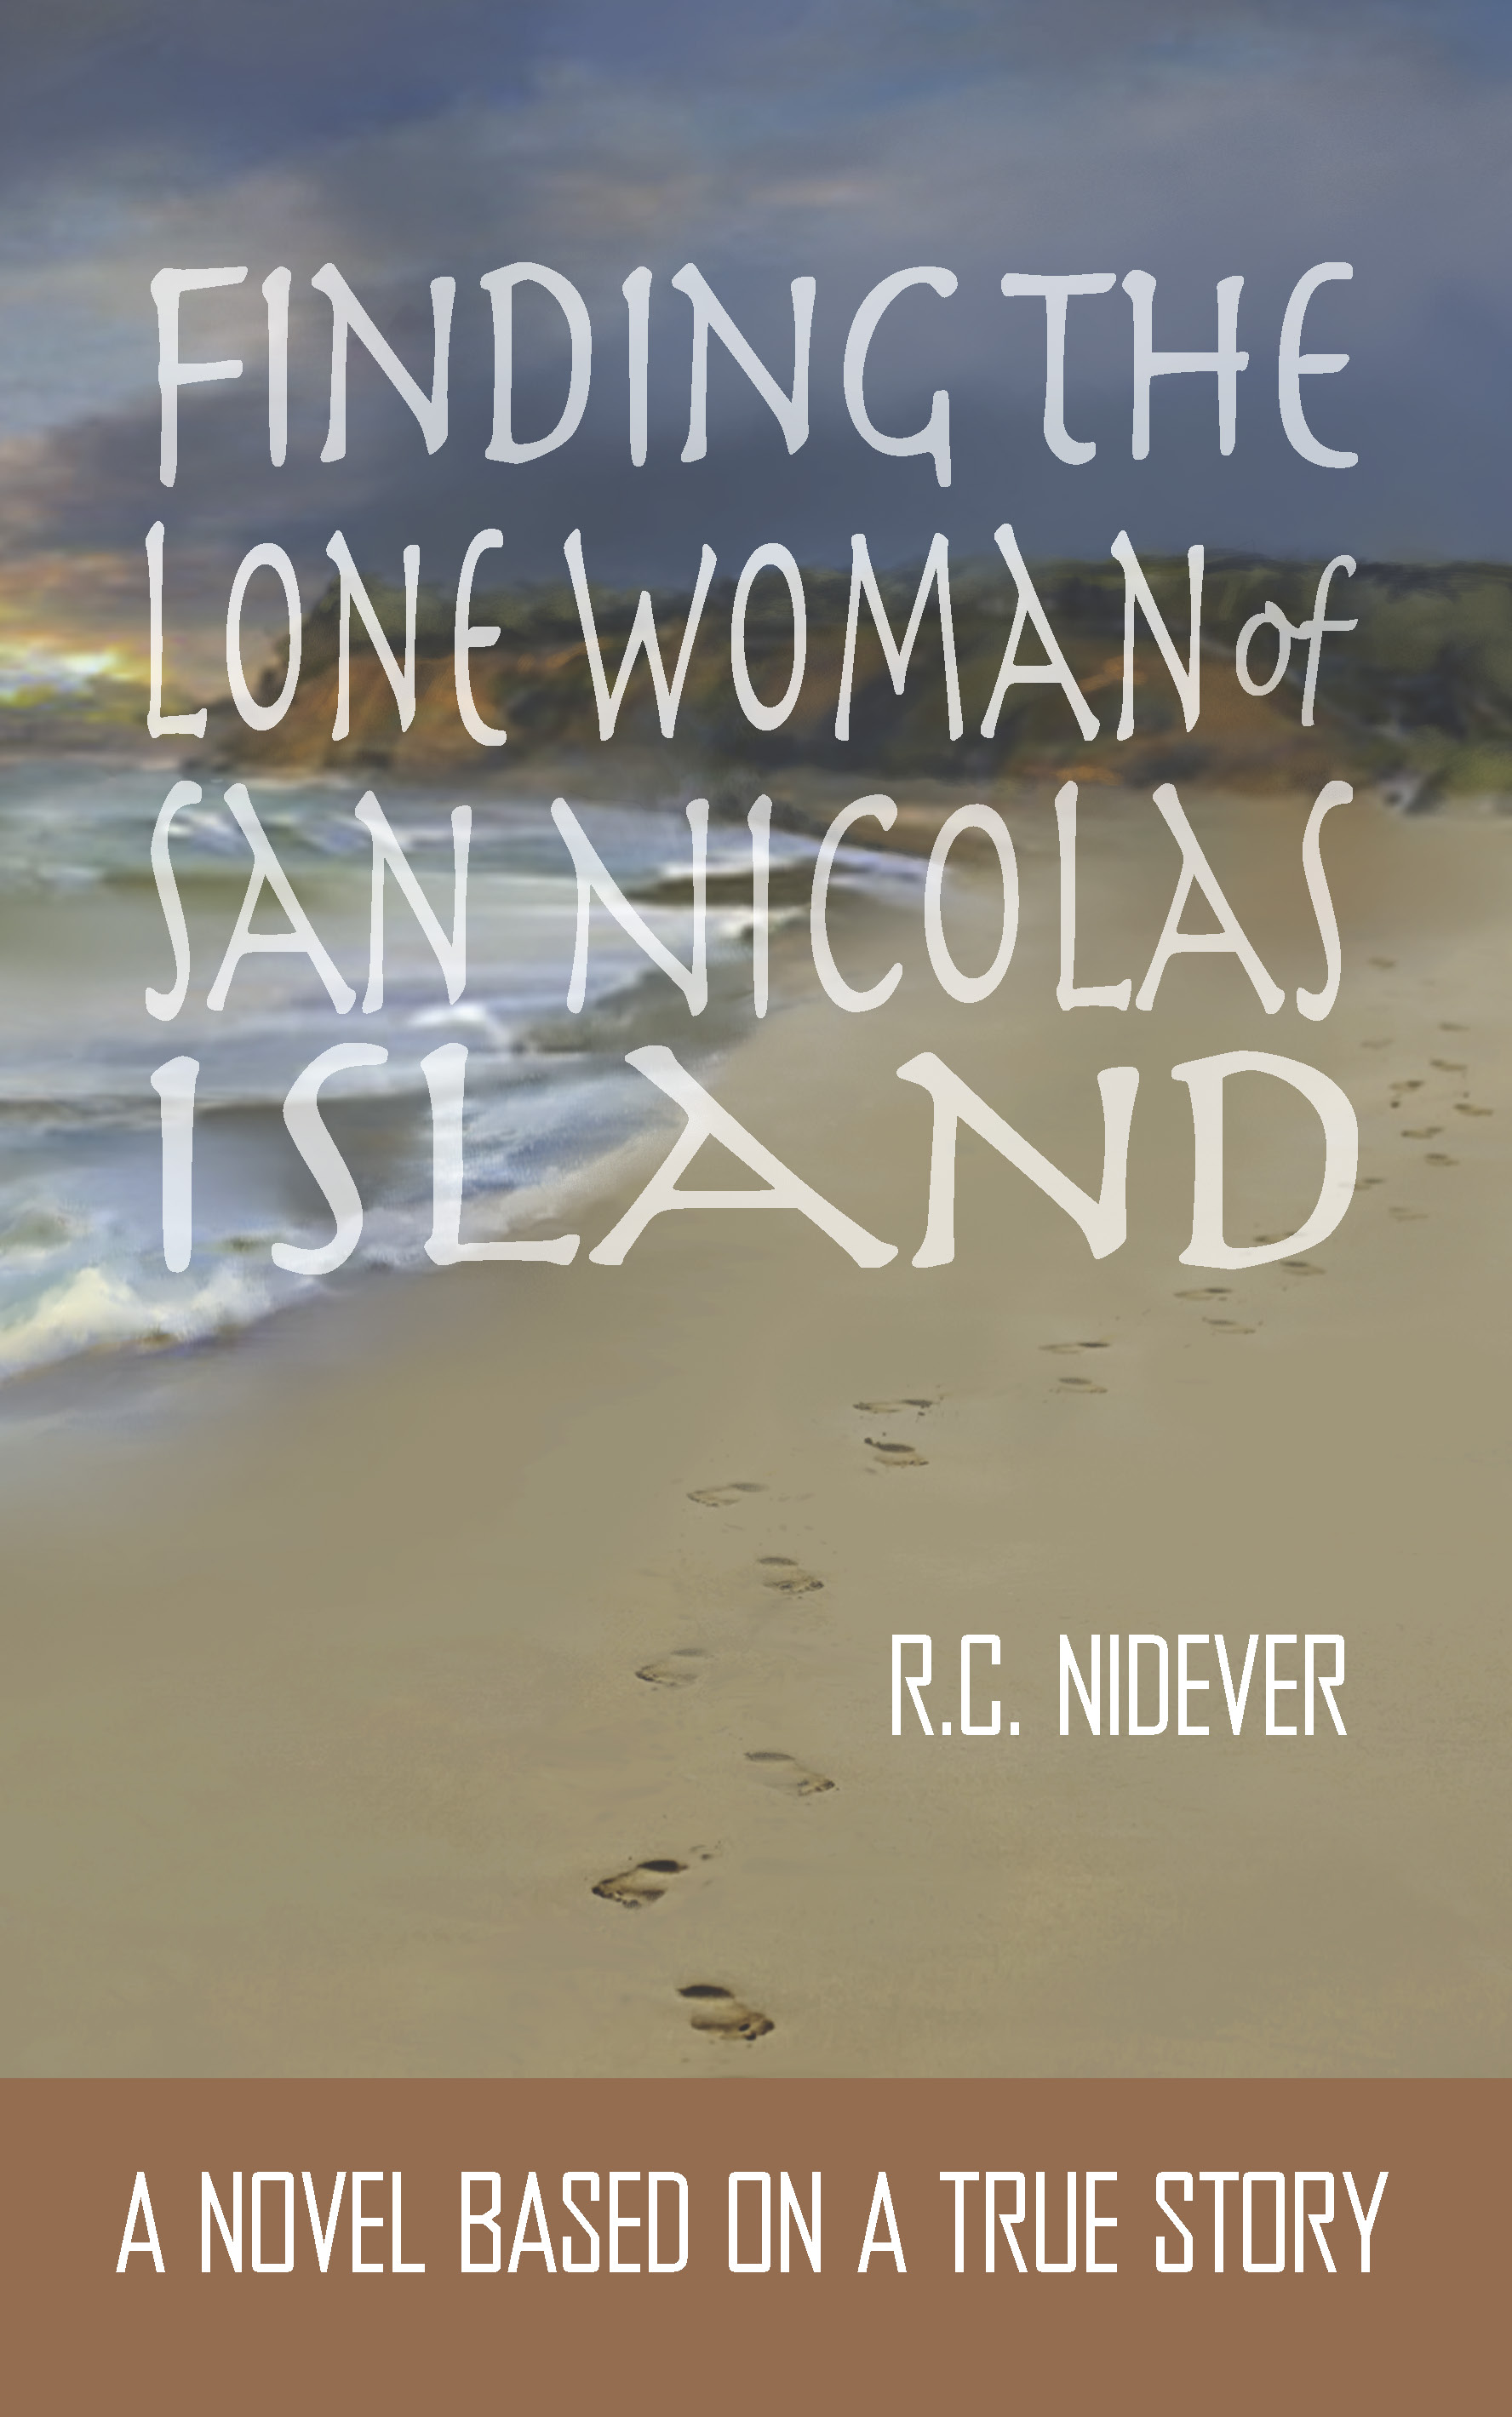 Finding the Lone Woman of San Nicolas Island by R. C. Nidever